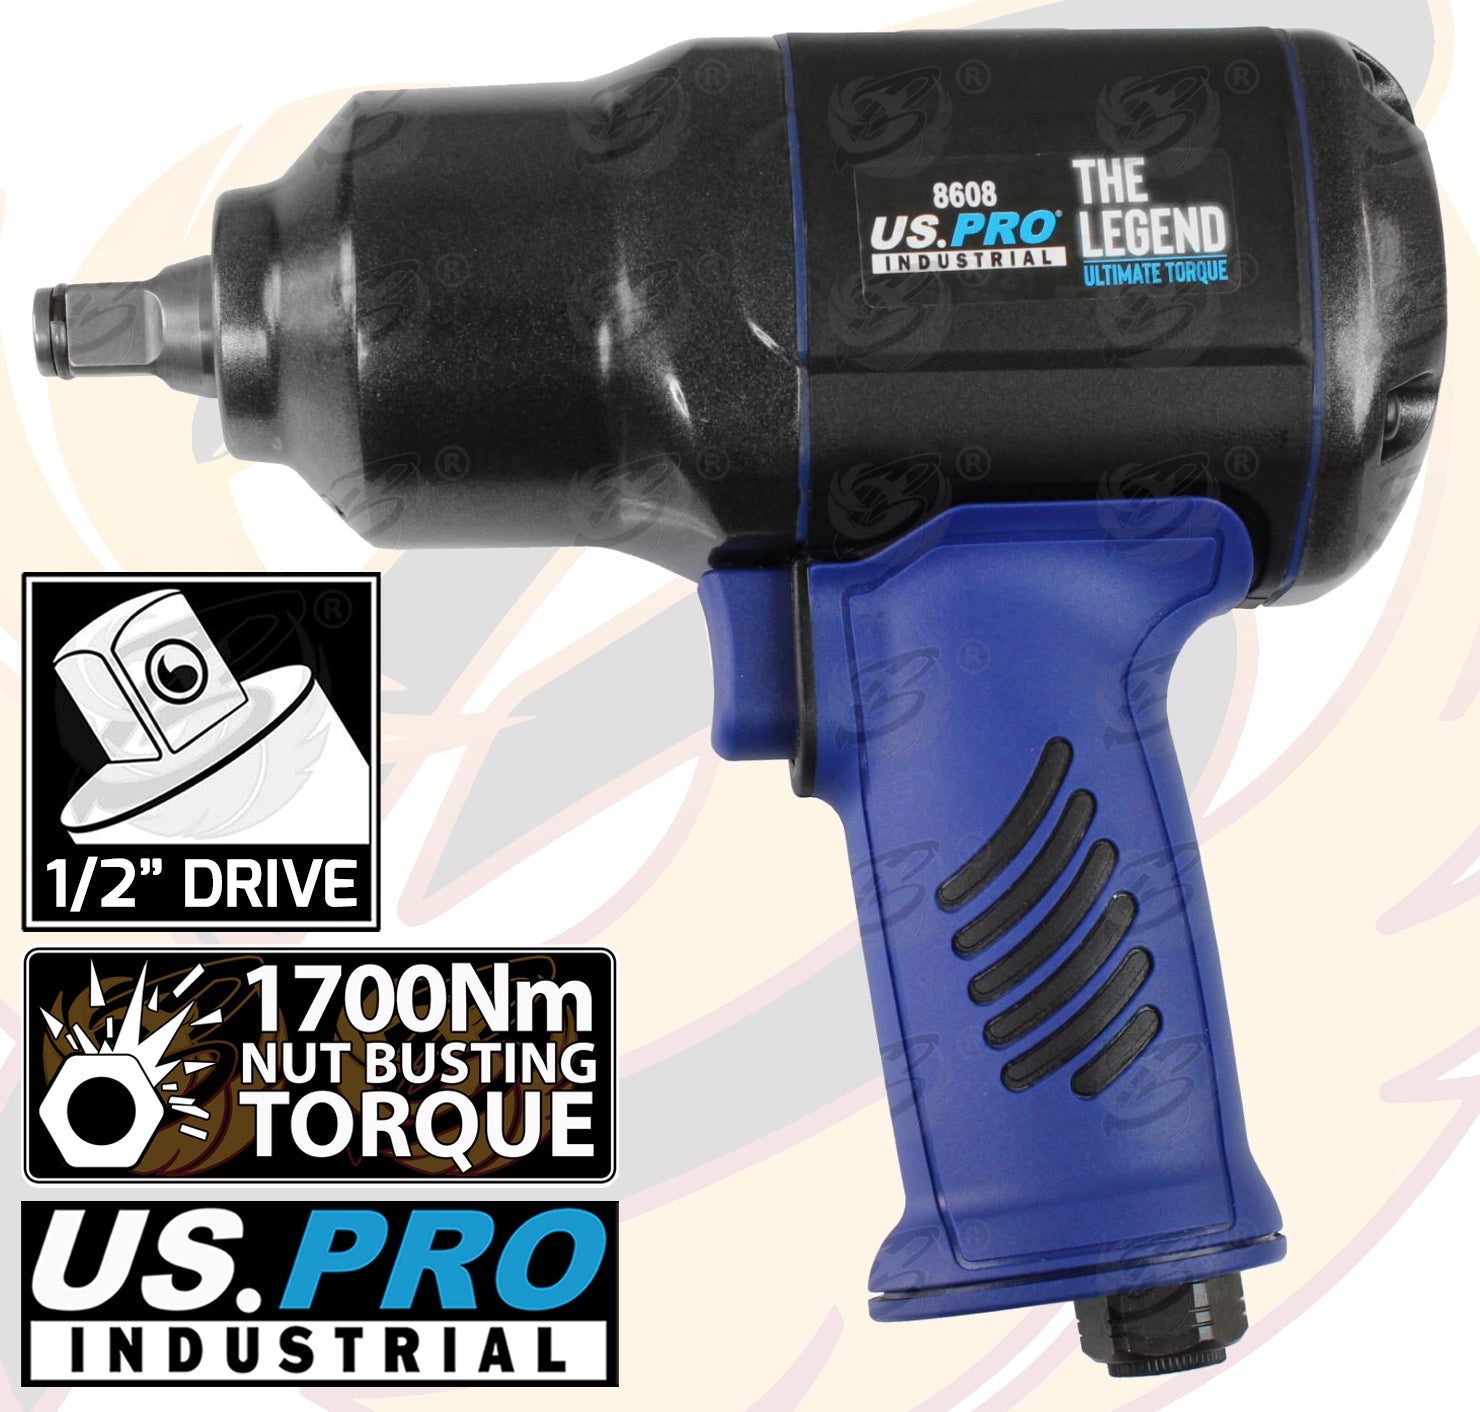 US PRO 1/2" DRIVE AIR IMPACT WRENCH 1700Nm ( THE LEGEND )